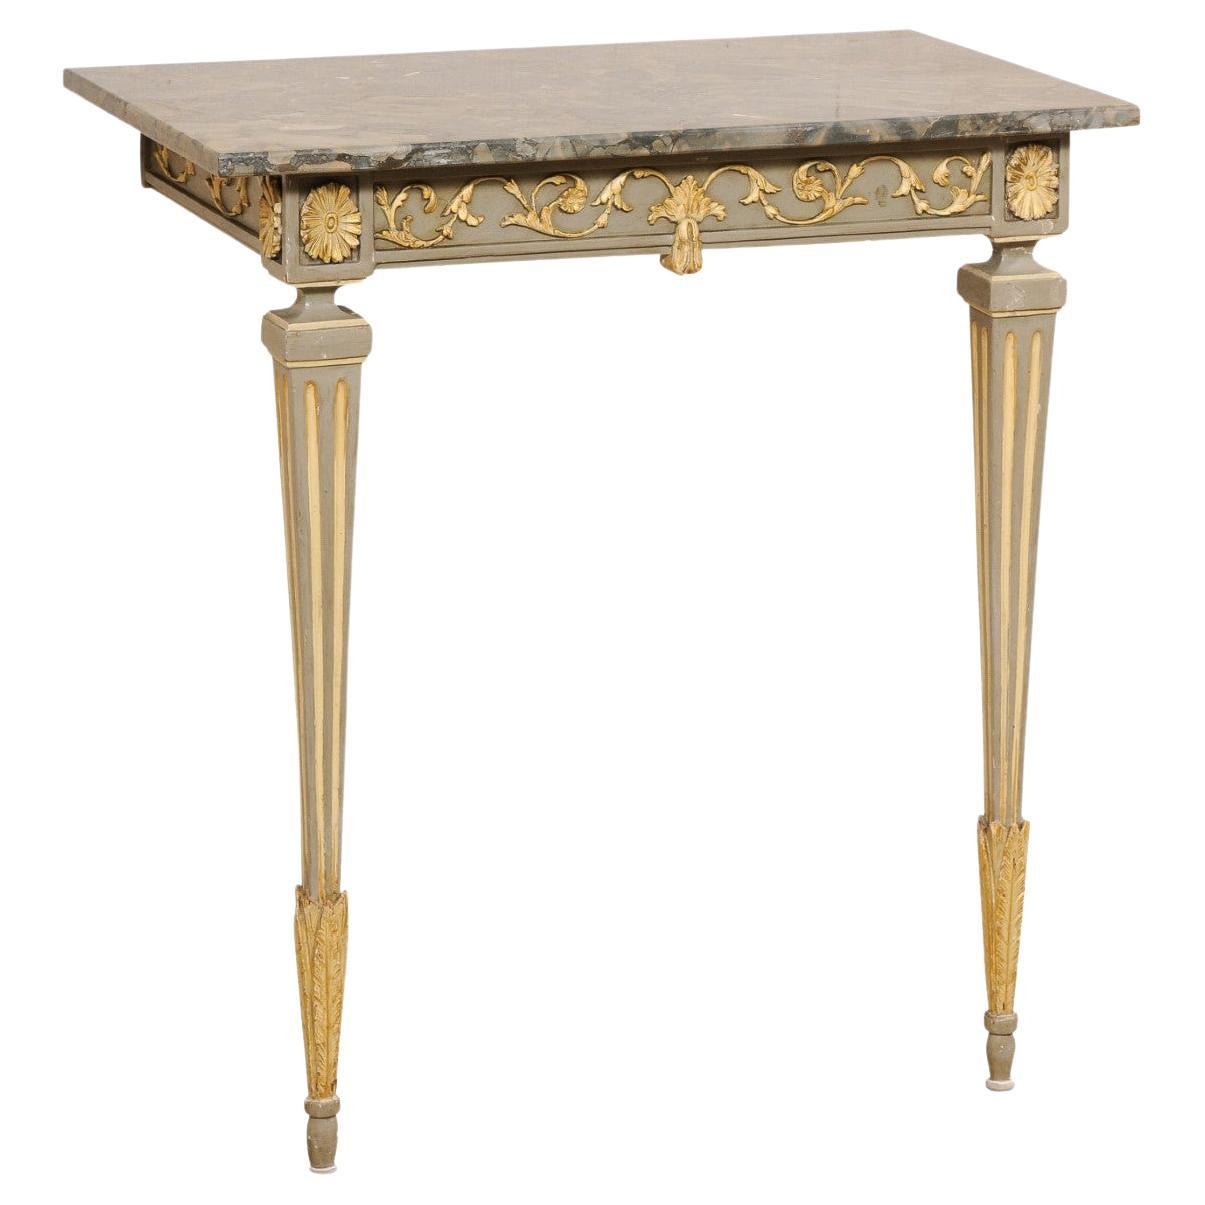 Italian 19th C. Two-Leg Carved & Gilt Wood Wall Console w/Green Marble Top